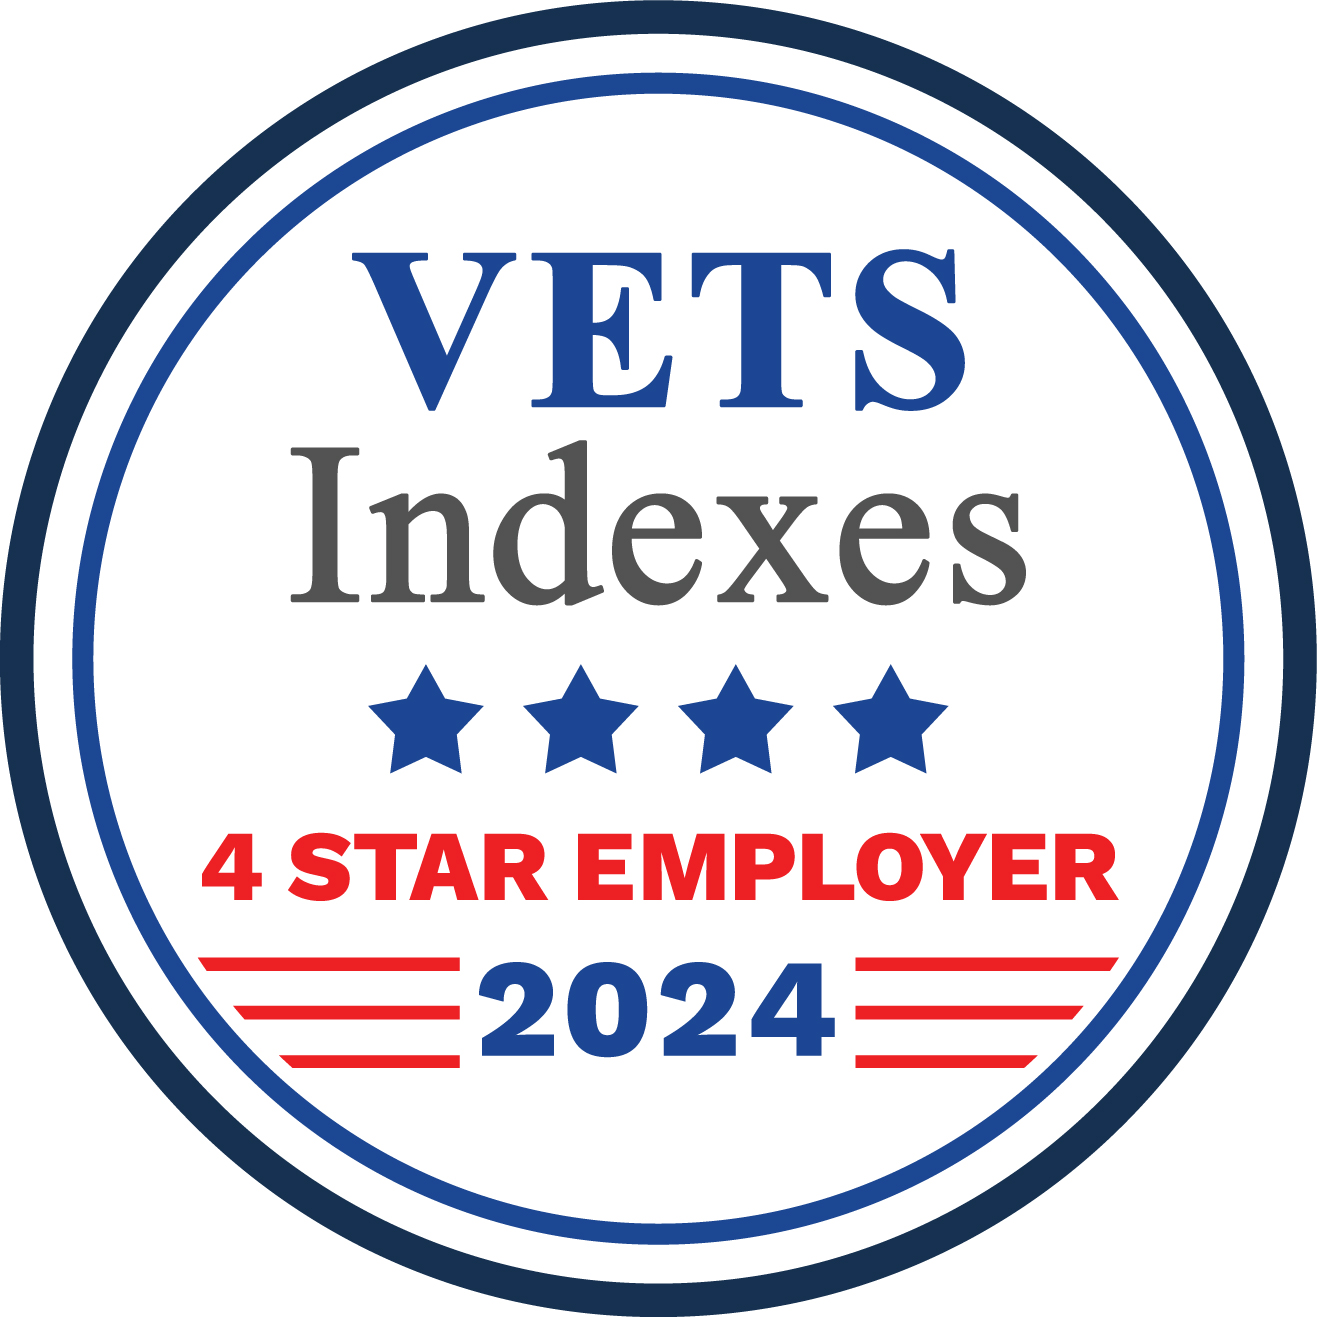 vets indexes 2024, 4 star employer